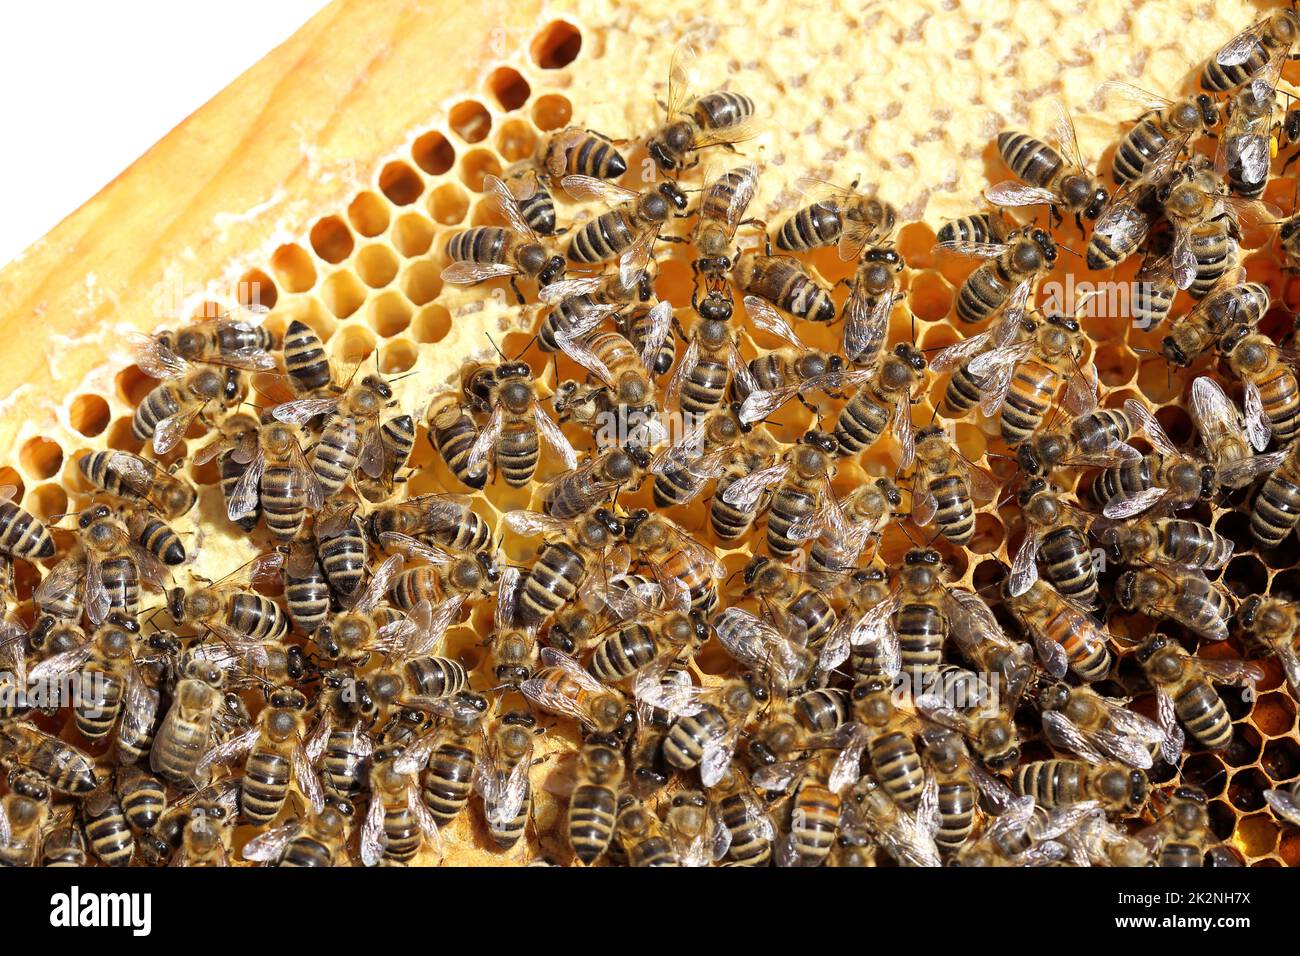 some honey bees on a yellow bee hive Stock Photo